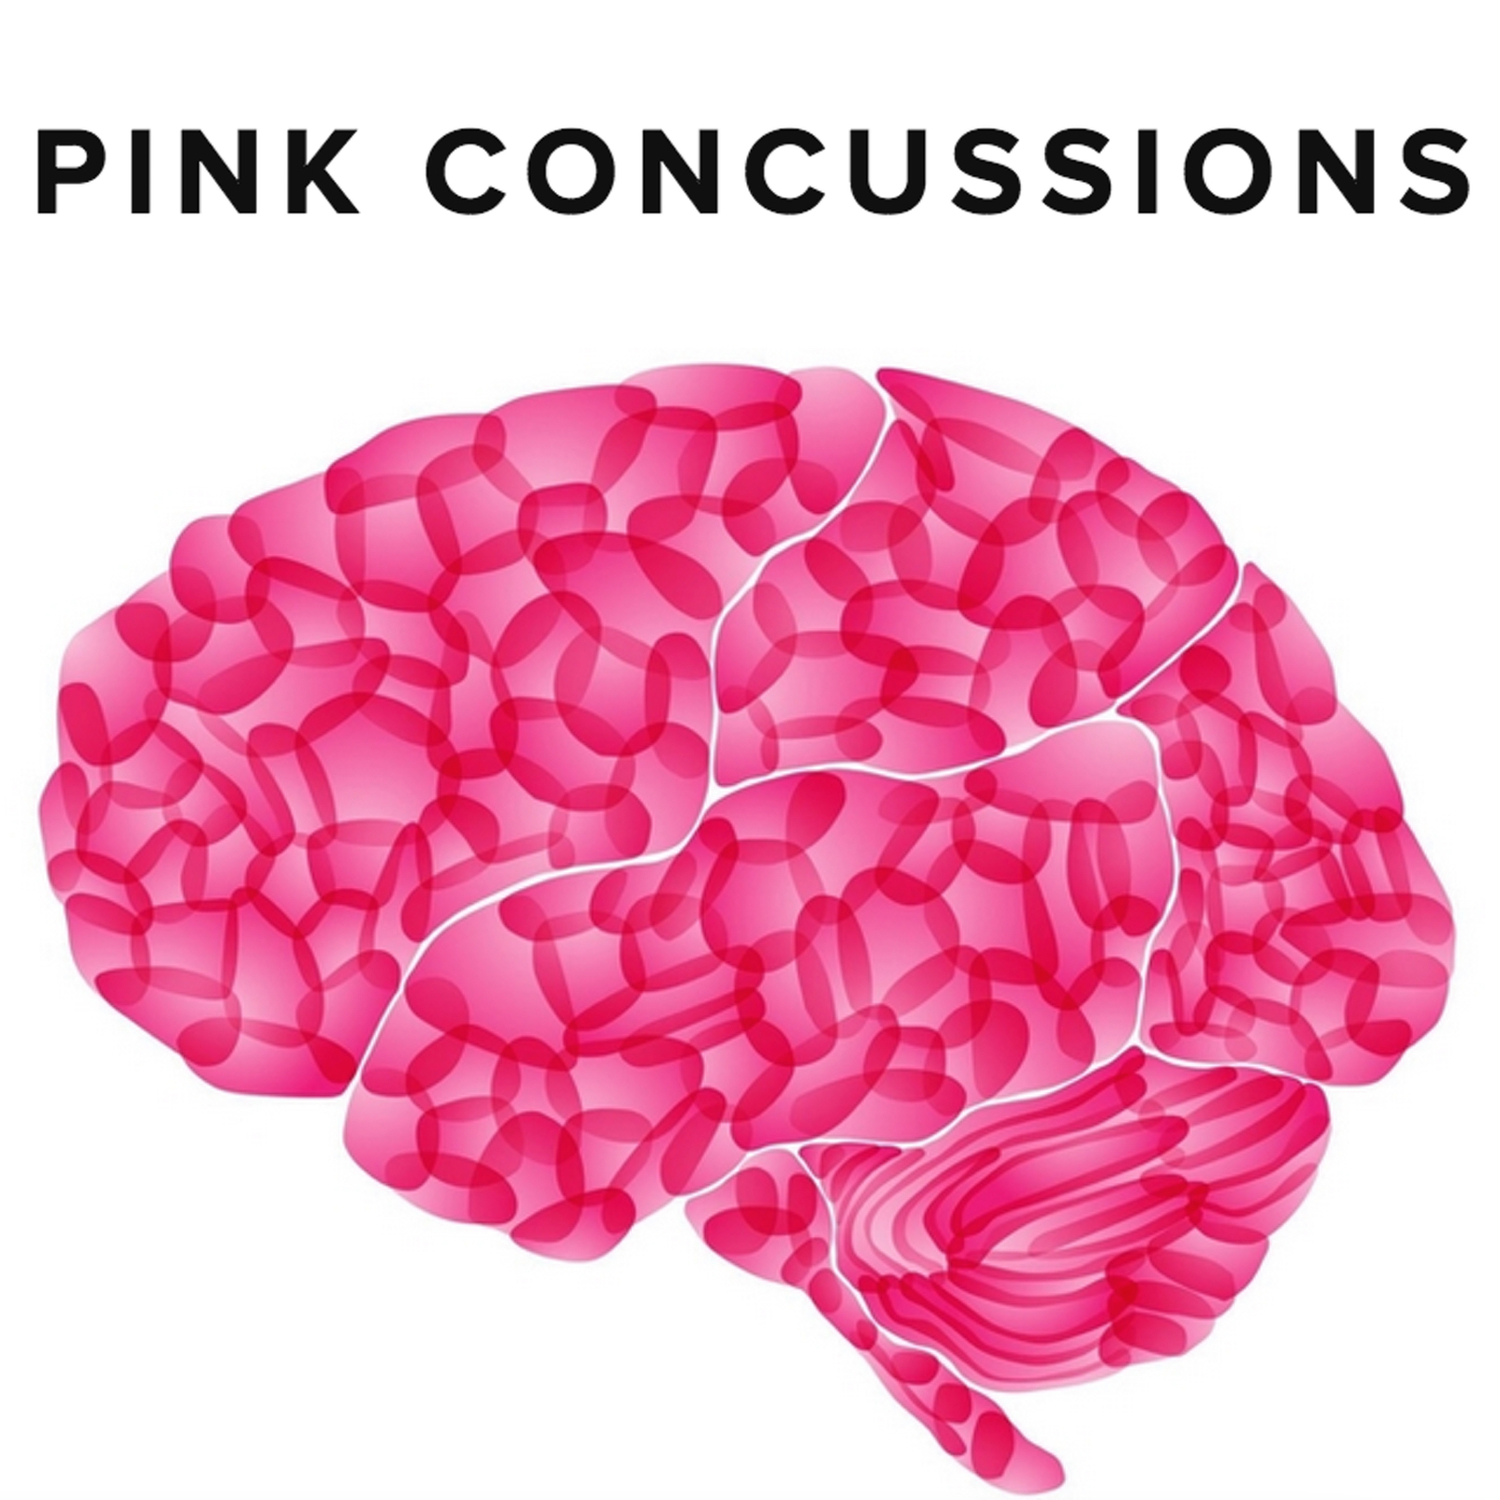 Pink Concussions